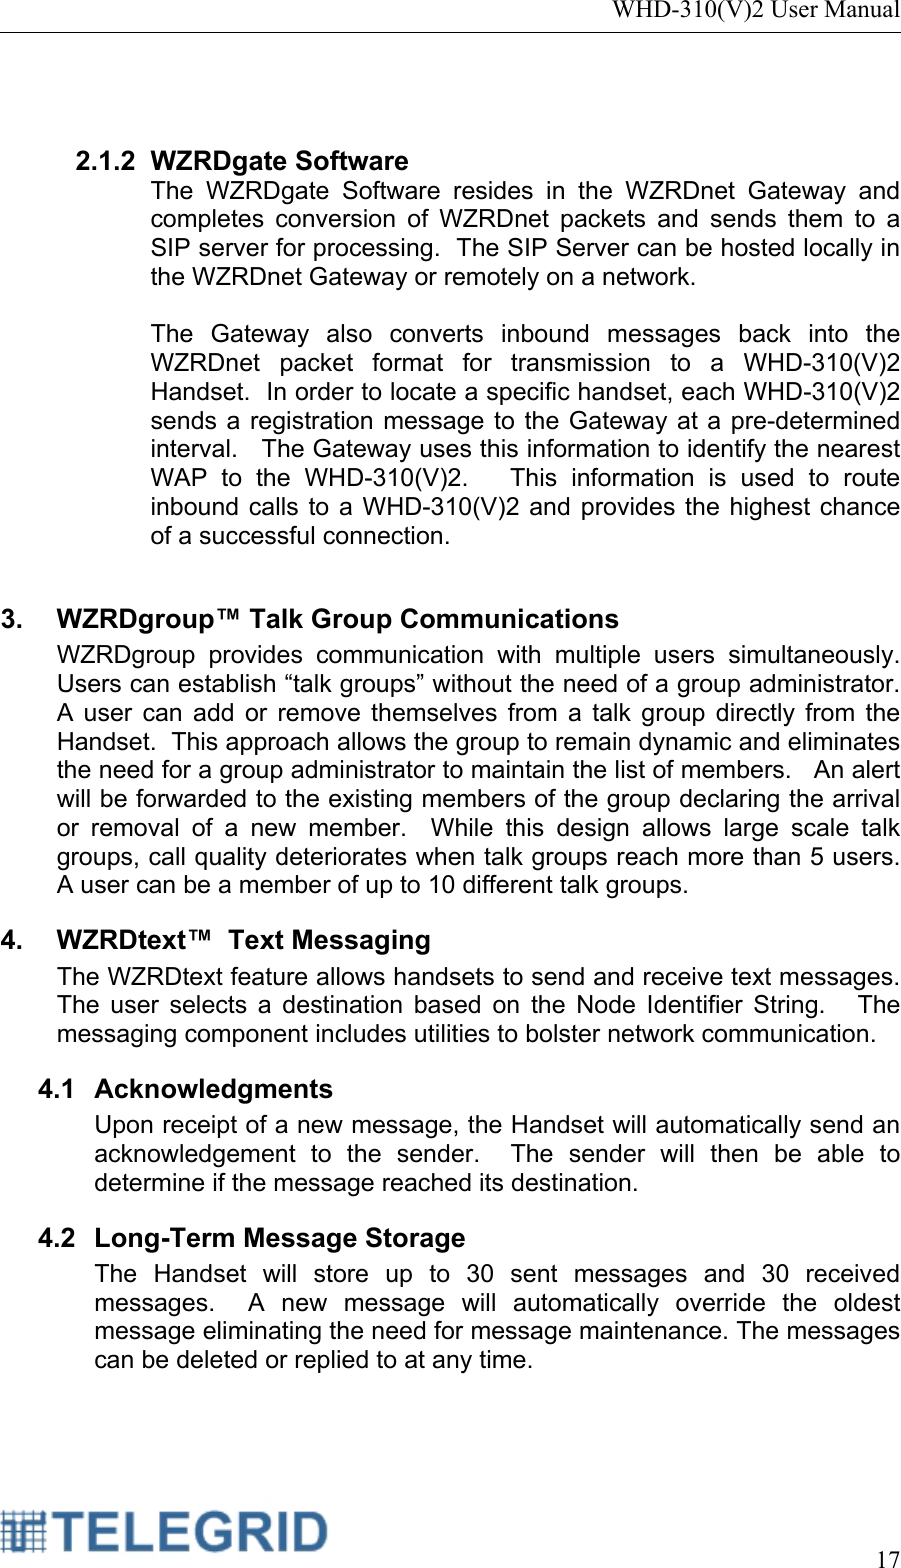 WHD-310(V)2 User Manual     17    2.1.2 WZRDgate Software The WZRDgate Software resides in the WZRDnet Gateway and completes conversion of WZRDnet packets and sends them to a SIP server for processing.  The SIP Server can be hosted locally in the WZRDnet Gateway or remotely on a network.  The Gateway also converts inbound messages back into the WZRDnet packet format for transmission to a WHD-310(V)2 Handset.  In order to locate a specific handset, each WHD-310(V)2 sends a registration message to the Gateway at a pre-determined interval.   The Gateway uses this information to identify the nearest WAP to the WHD-310(V)2.   This information is used to route inbound calls to a WHD-310(V)2 and provides the highest chance of a successful connection.  3. WZRDgroup™ Talk Group Communications WZRDgroup provides communication with multiple users simultaneously.  Users can establish “talk groups” without the need of a group administrator.  A user can add or remove themselves from a talk group directly from the Handset.  This approach allows the group to remain dynamic and eliminates the need for a group administrator to maintain the list of members.   An alert will be forwarded to the existing members of the group declaring the arrival or removal of a new member.  While this design allows large scale talk groups, call quality deteriorates when talk groups reach more than 5 users.  A user can be a member of up to 10 different talk groups. 4.  WZRDtext™  Text Messaging The WZRDtext feature allows handsets to send and receive text messages.  The user selects a destination based on the Node Identifier String.   The messaging component includes utilities to bolster network communication. 4.1 Acknowledgments Upon receipt of a new message, the Handset will automatically send an acknowledgement to the sender.  The sender will then be able to determine if the message reached its destination.   4.2  Long-Term Message Storage The Handset will store up to 30 sent messages and 30 received messages.  A new message will automatically override the oldest message eliminating the need for message maintenance. The messages can be deleted or replied to at any time. 